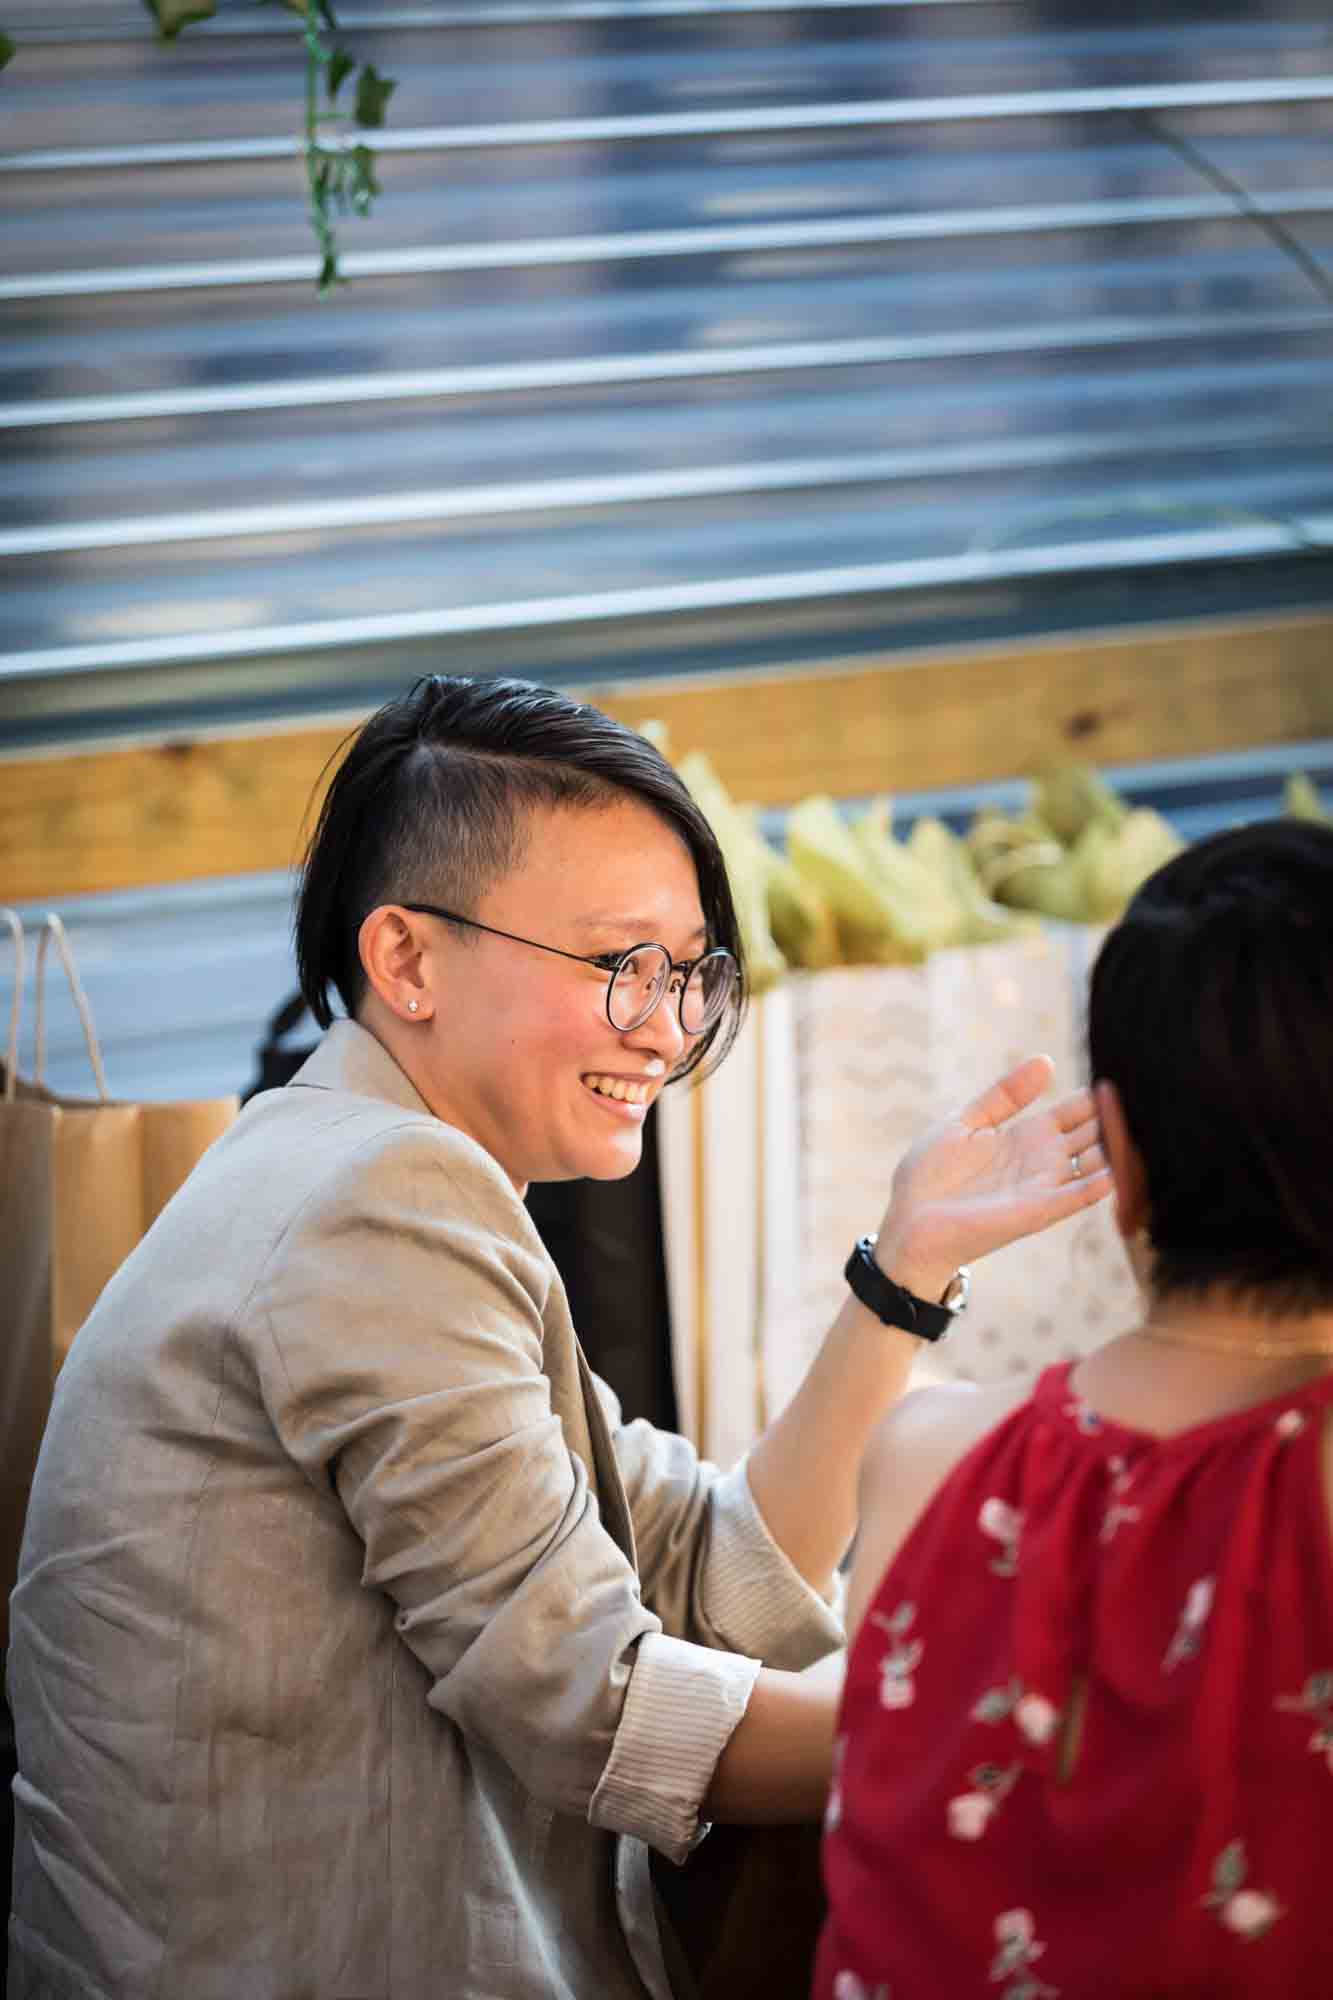 Asian woman with shaved hair during rehearsal dinner at an outdoor restaurant